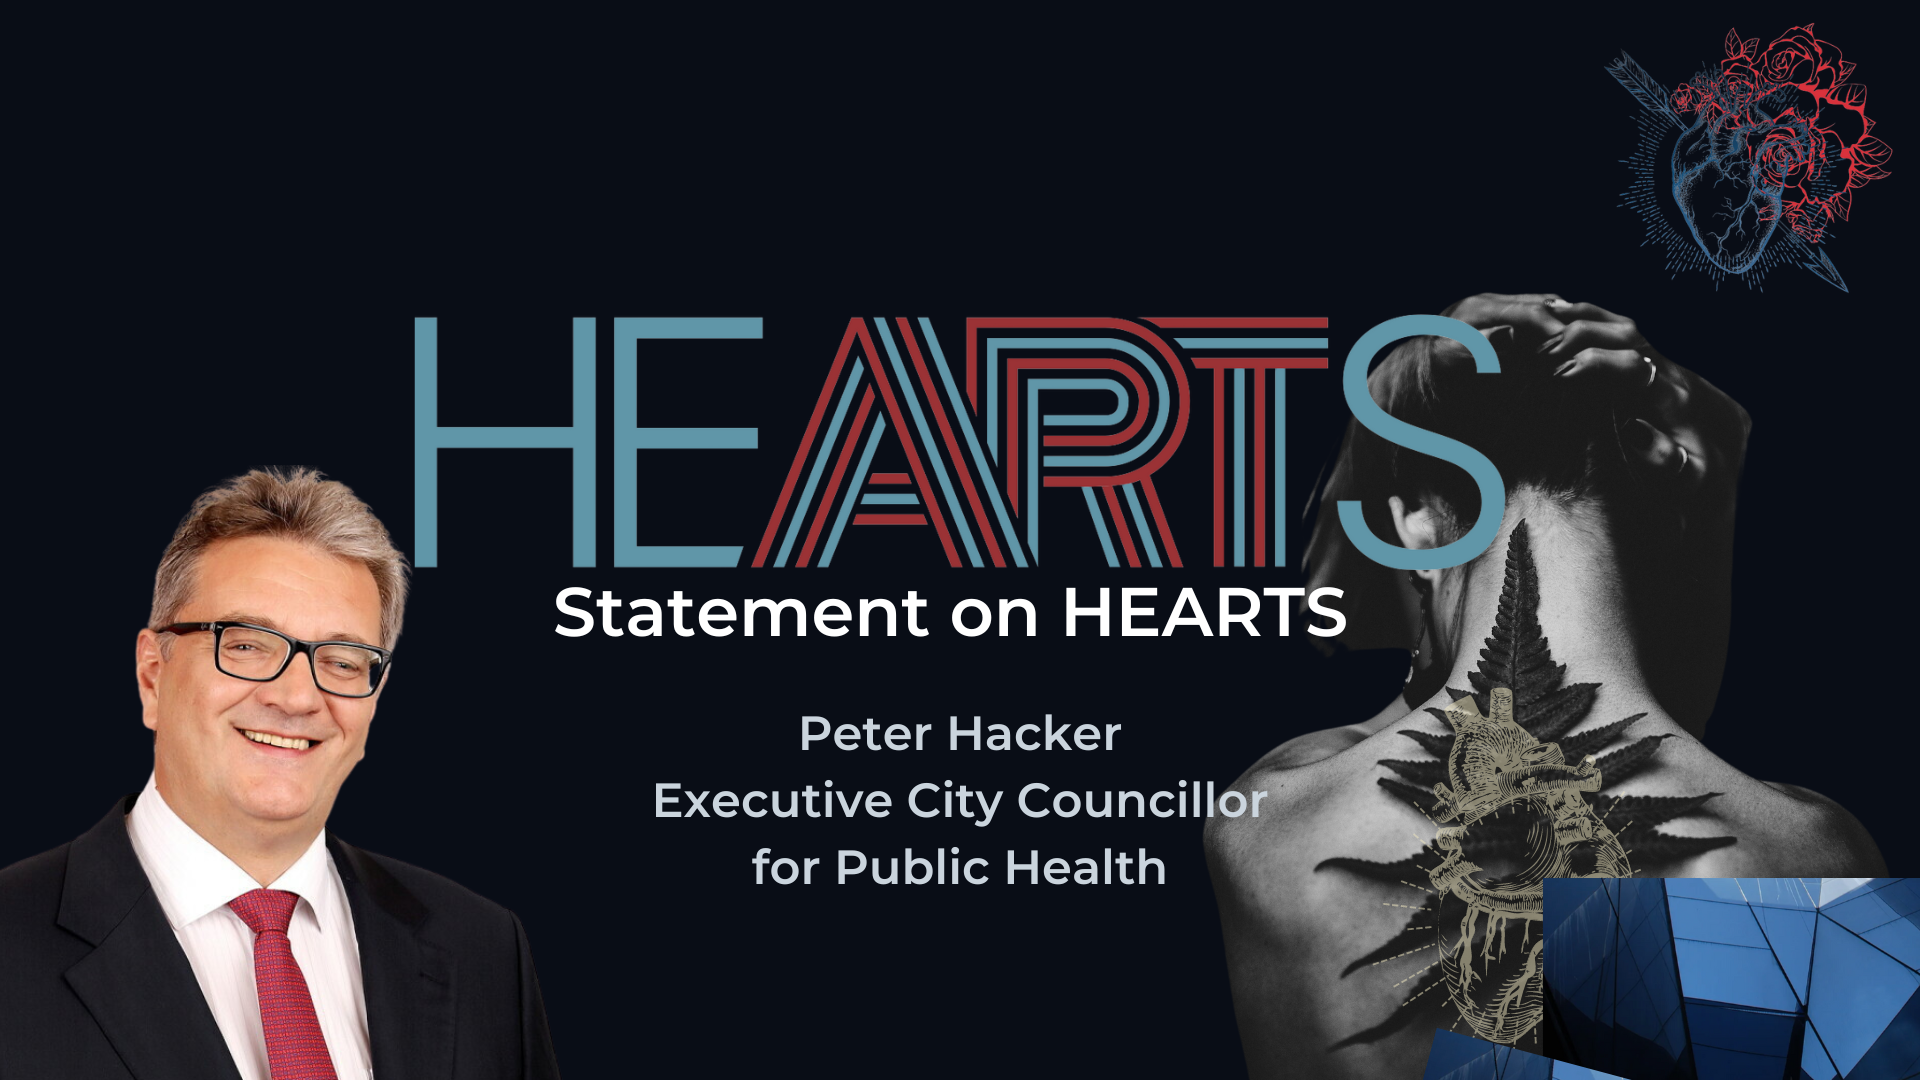 Statement on HEARTS: Peter Hacker, Executive City Councillor for Public Health